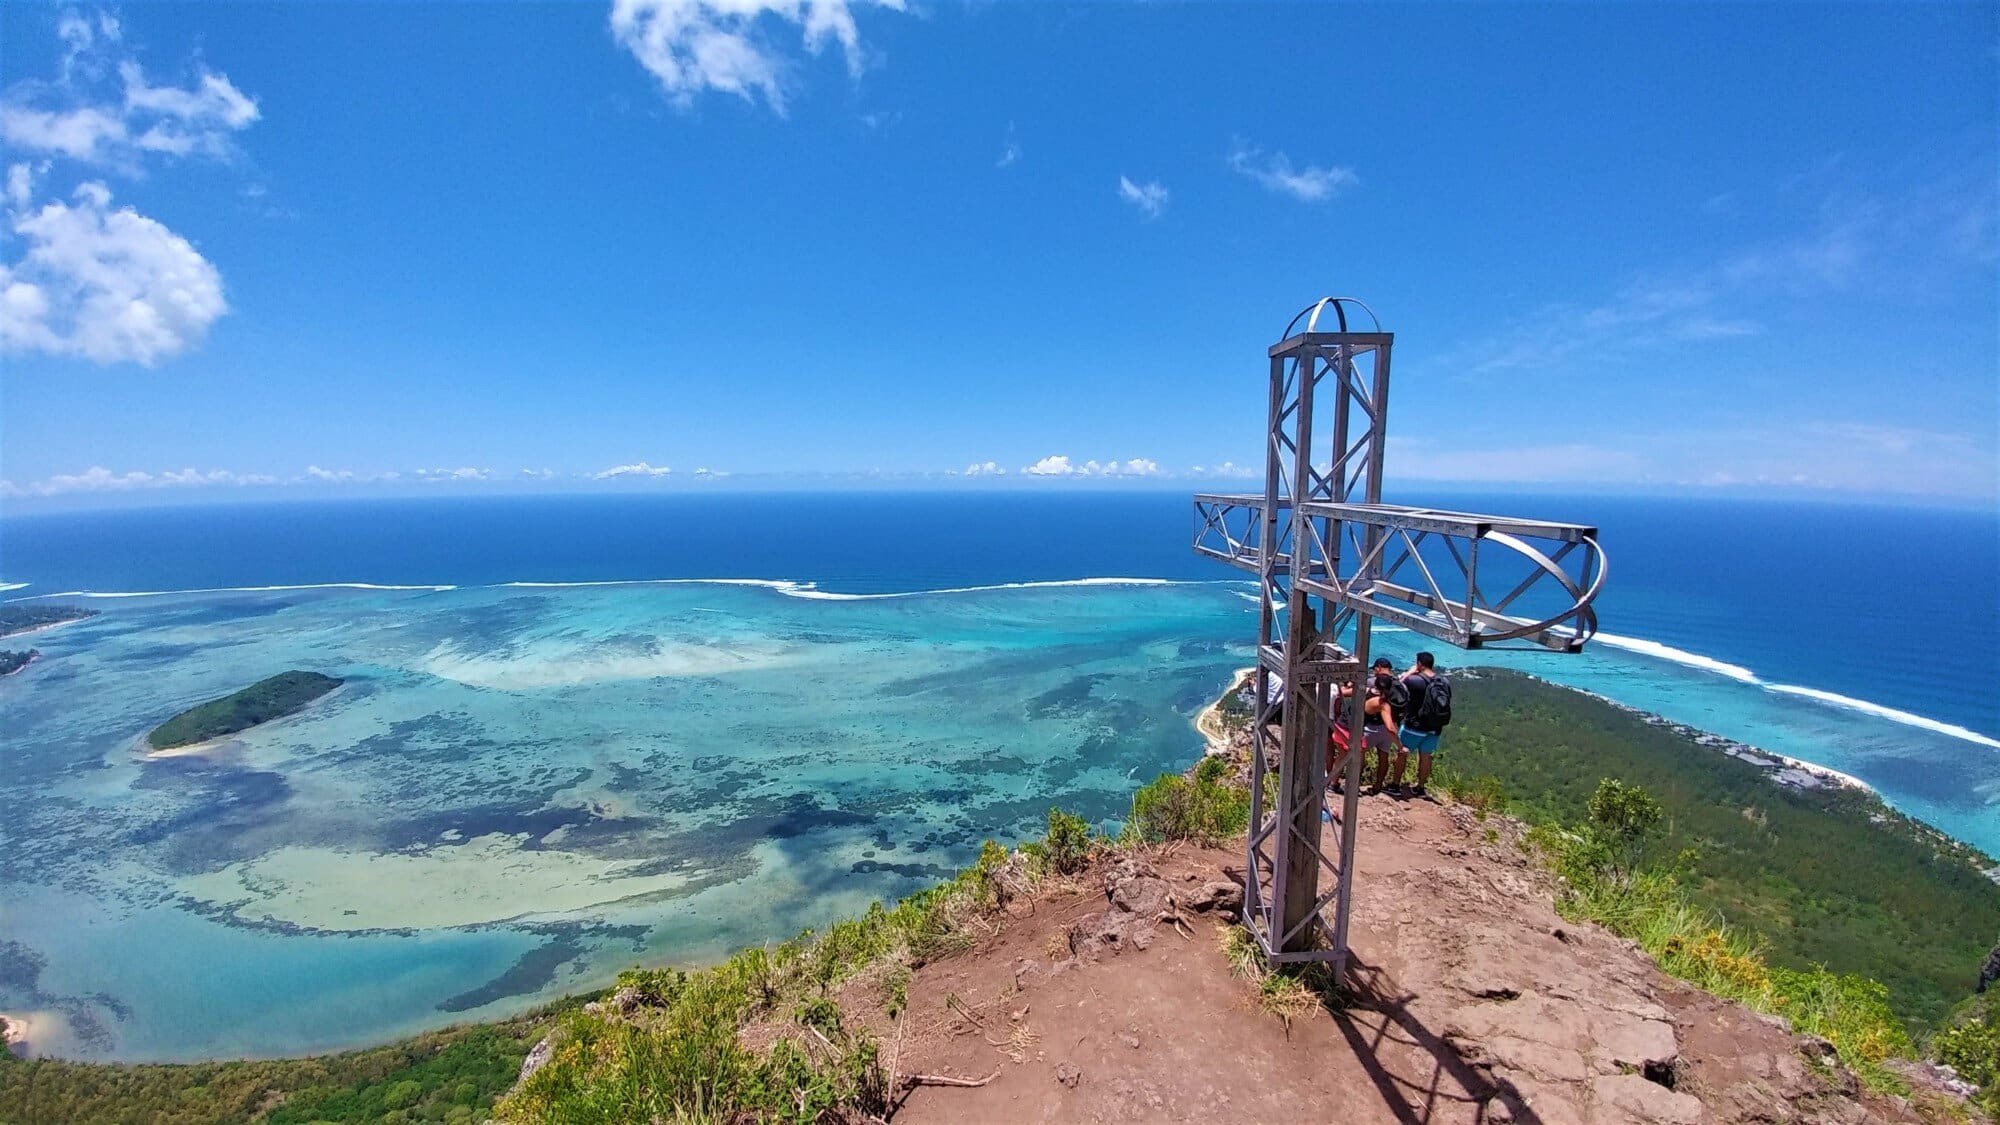 Le-Morne-Brabant - top viewpoints in mauritius